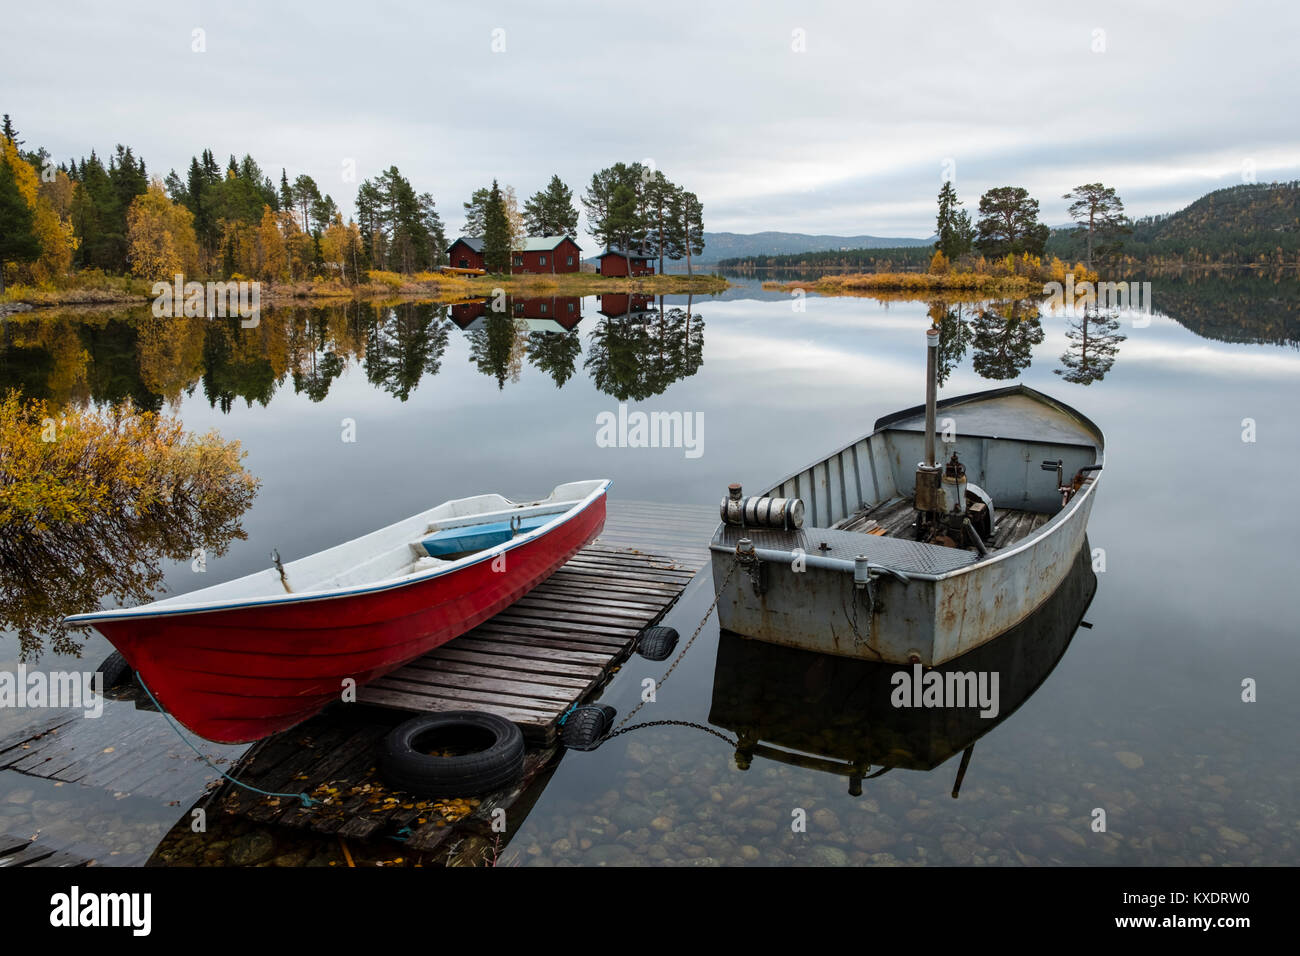 Boats at the lake, Autumnal landscape, Mirroring, Norrbottens, Norrbottens län, Laponia, Lapland, Sweden Stock Photo